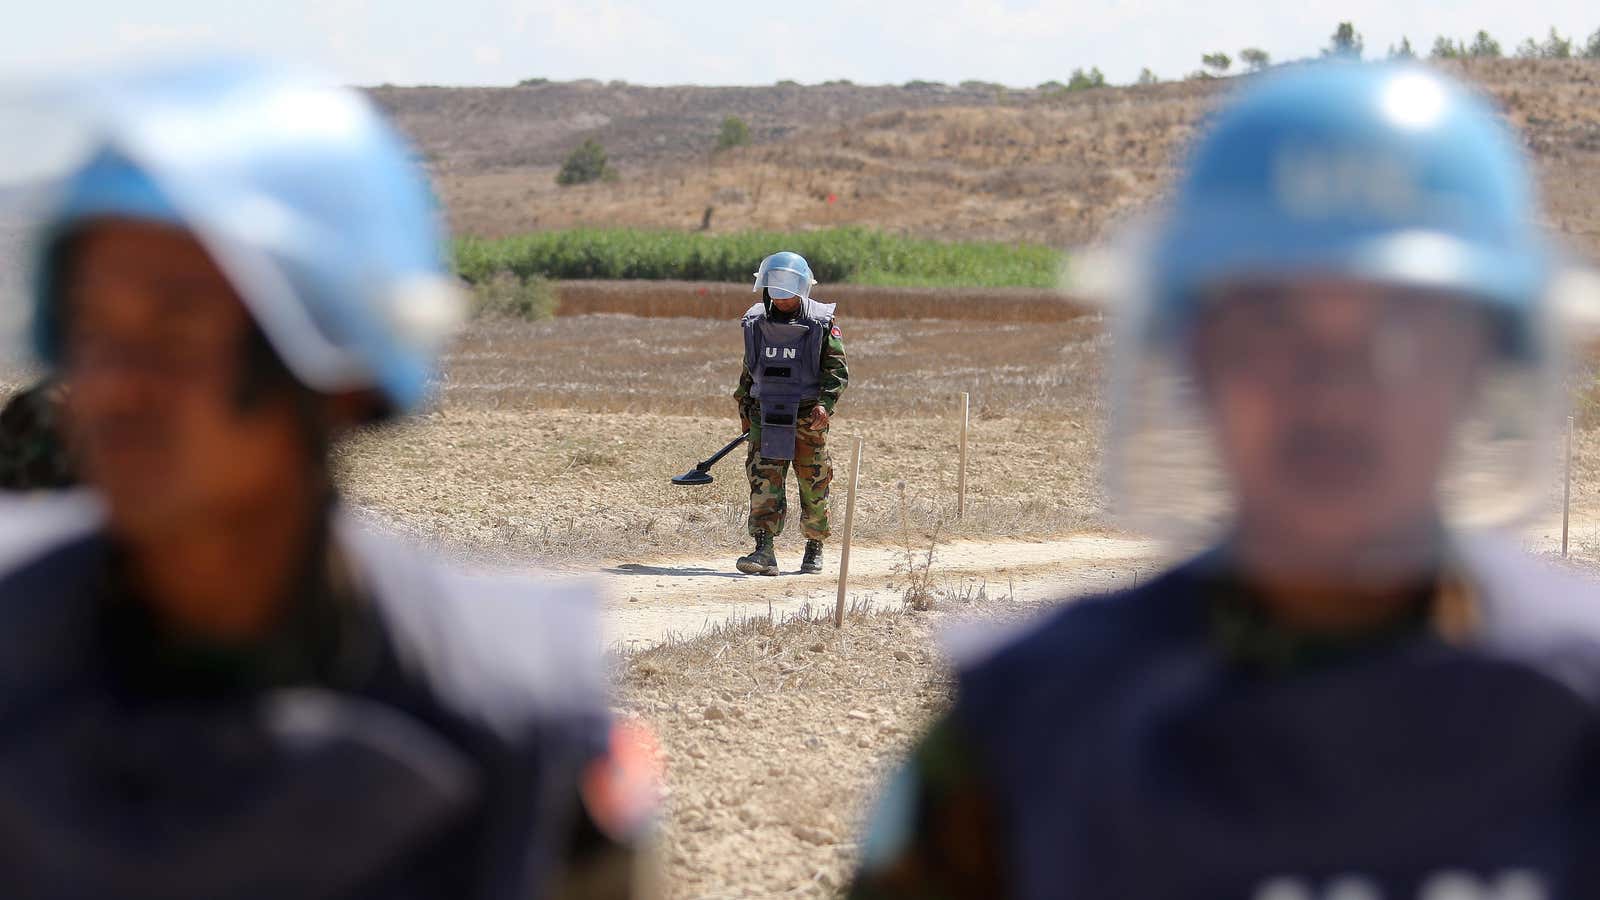 For peacekeepers to be effective, they need up-to-date tech at their disposal.